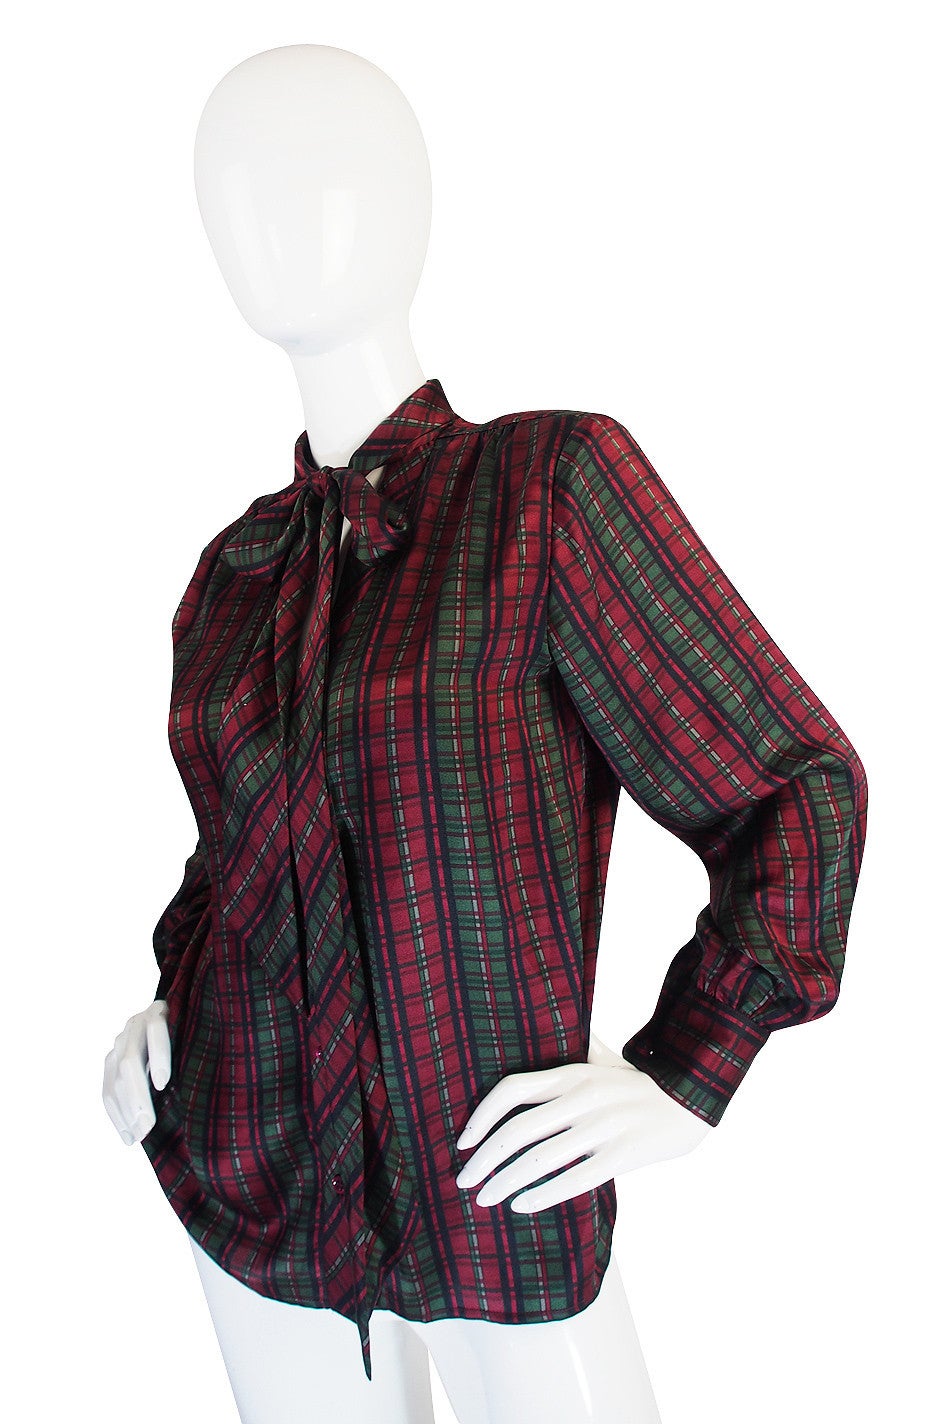 This beautiful silk blouse is a classic from Yves Saint Laurent. It is an amazing color and print combination - a gorgeous plaid down in deep red and greens on a fine silk. It has that signature YSL tie at the neck and it can be left unbuttoned for